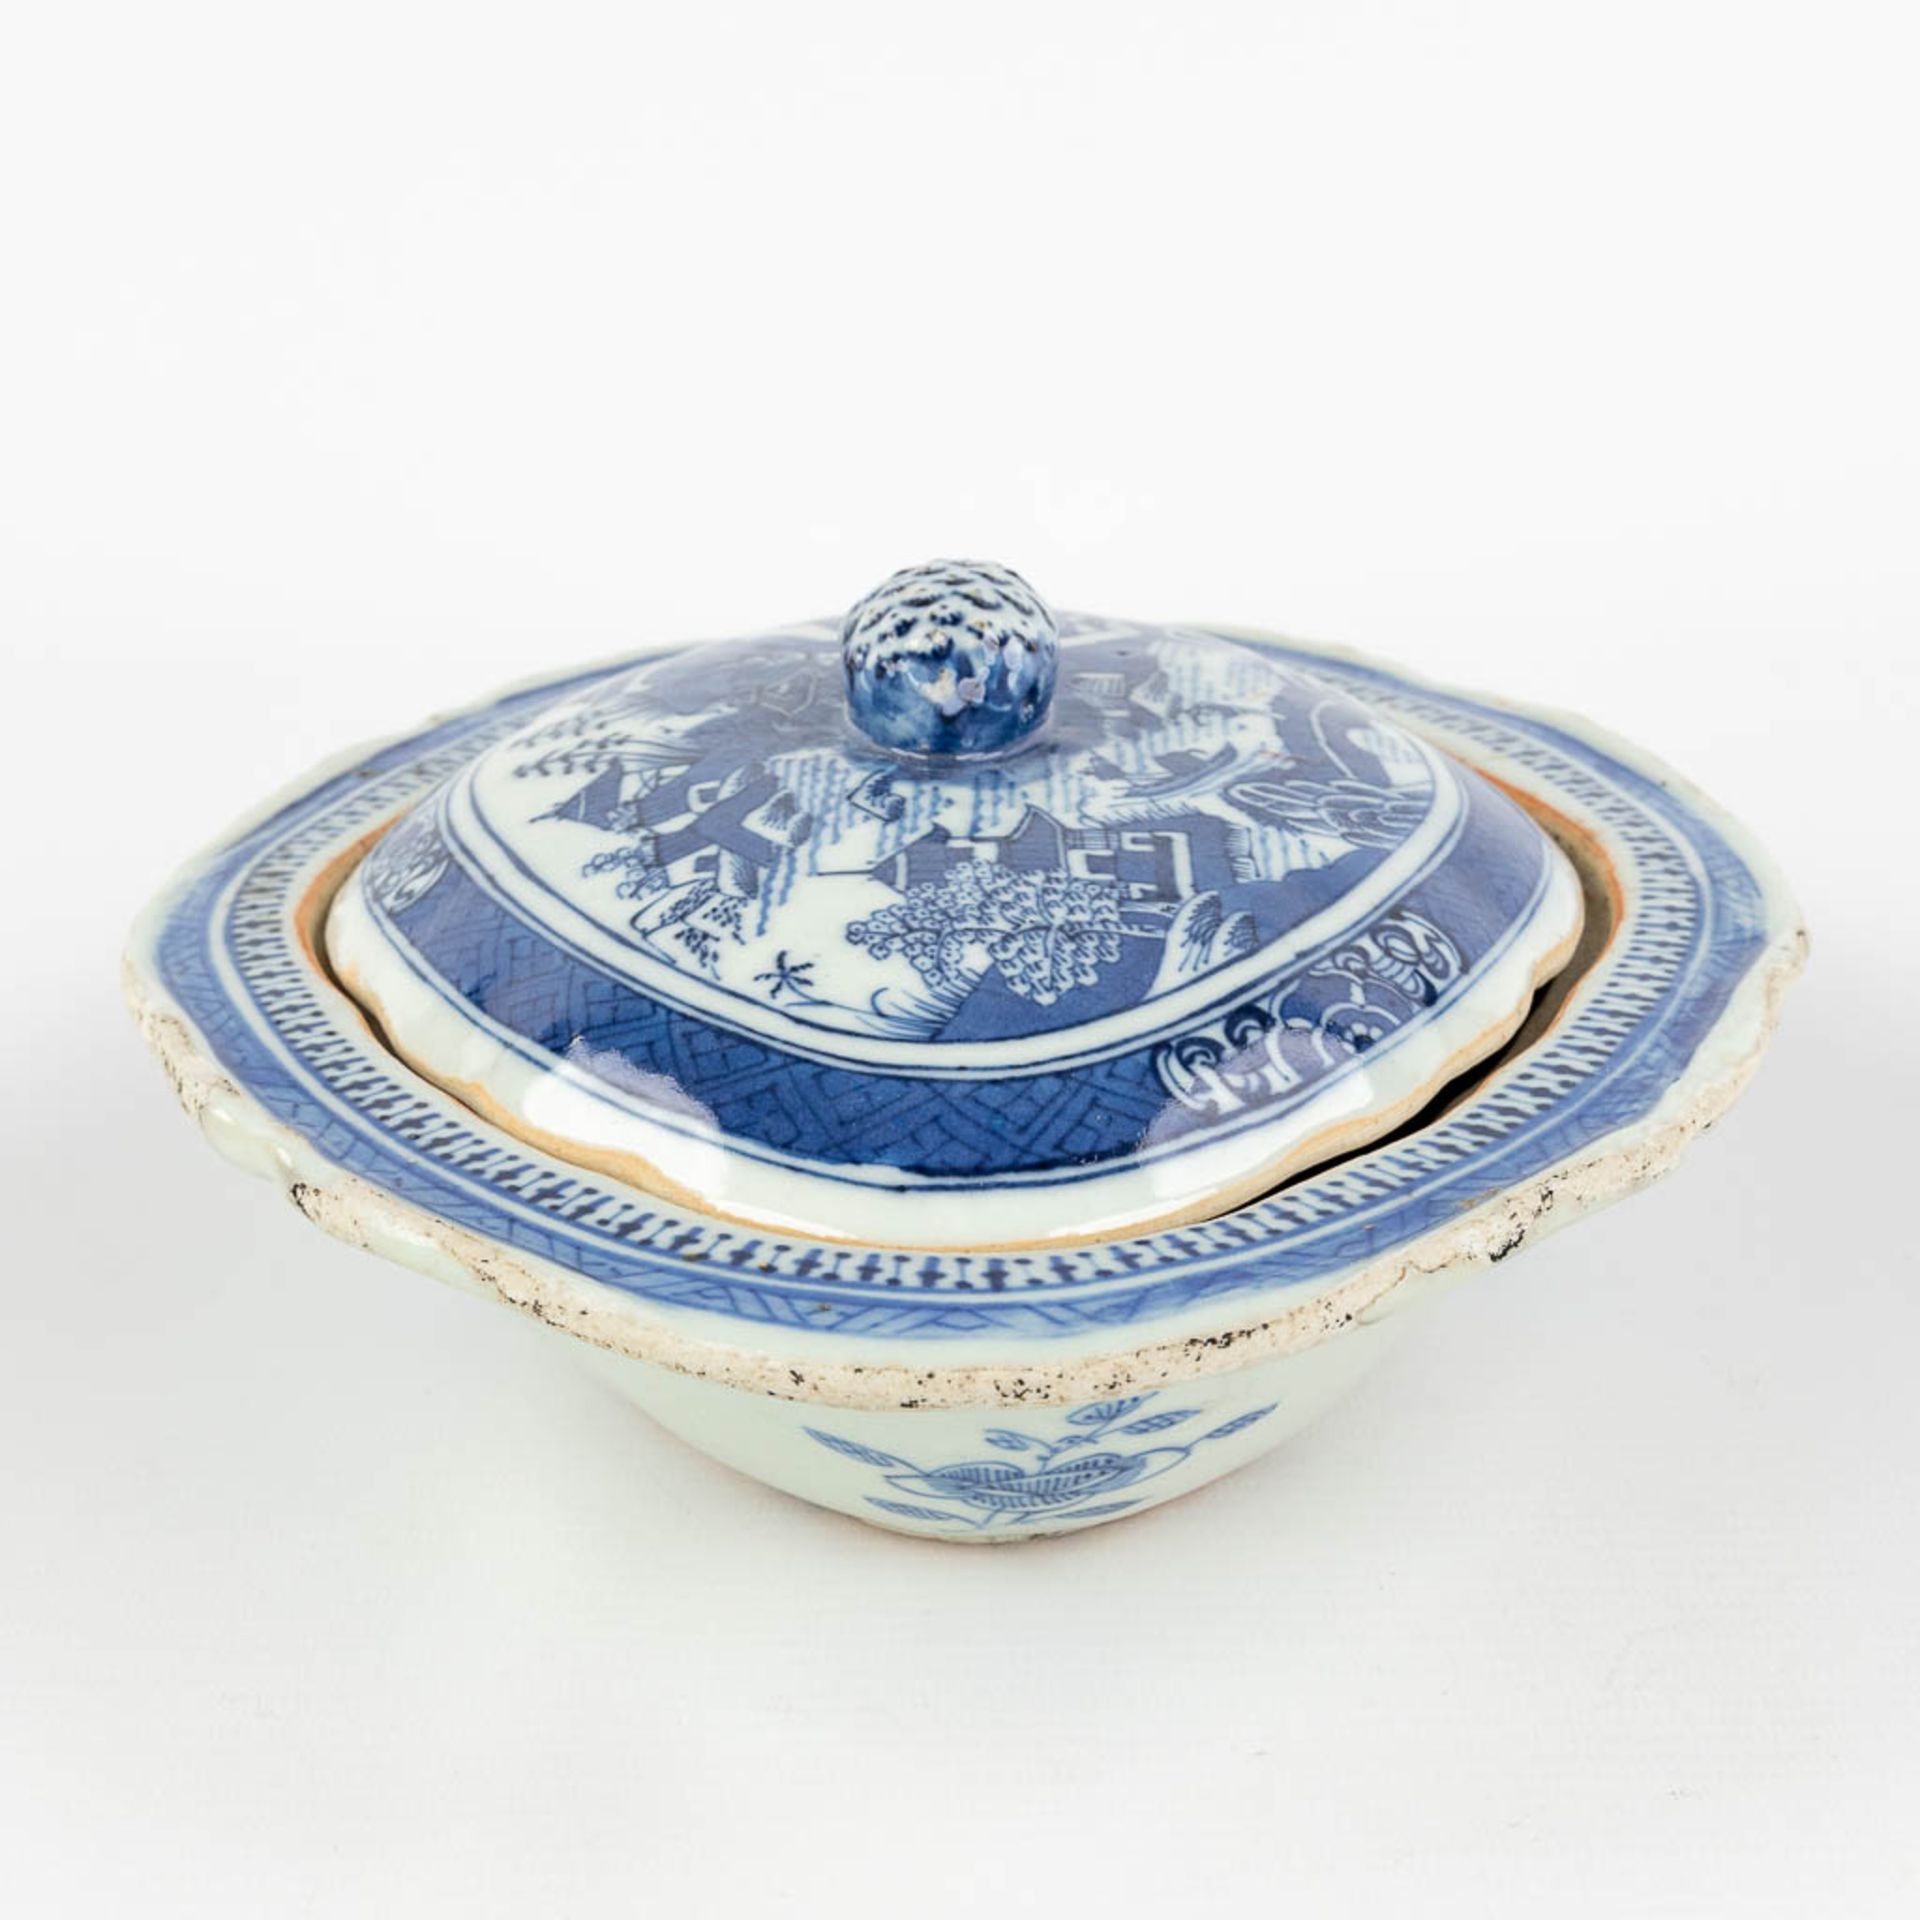 A Chinese bowl with a lid and blue-white landscape decor. 19th C. (L: 21,5 x W: 26,5 x H: 10 cm) - Image 4 of 15